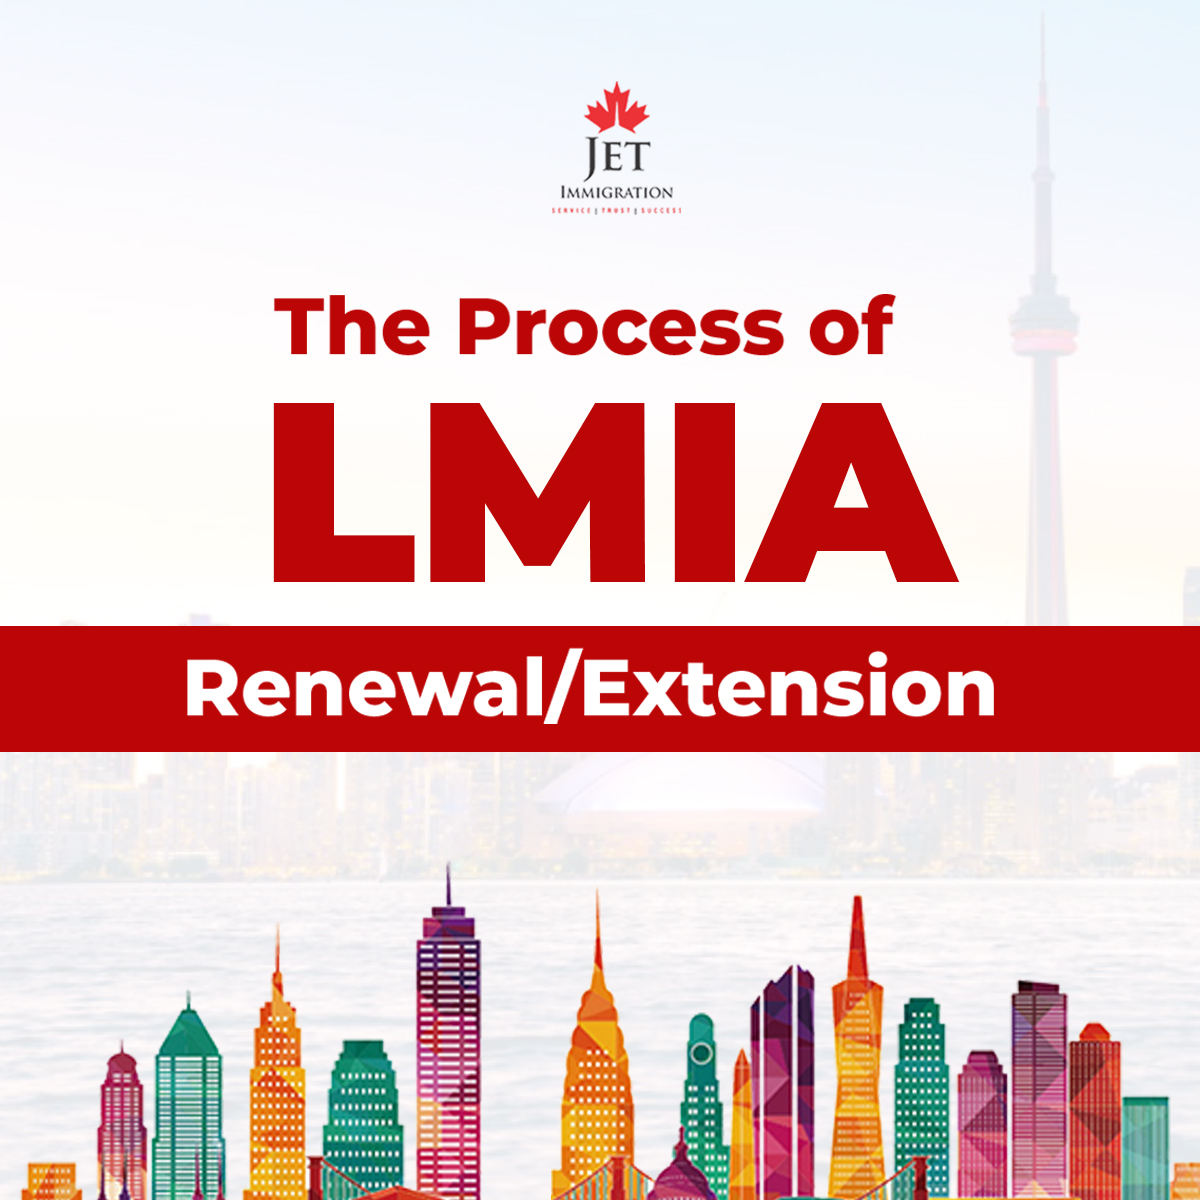 LMIA Work Permit Extensions: Renewal Process and Requirements